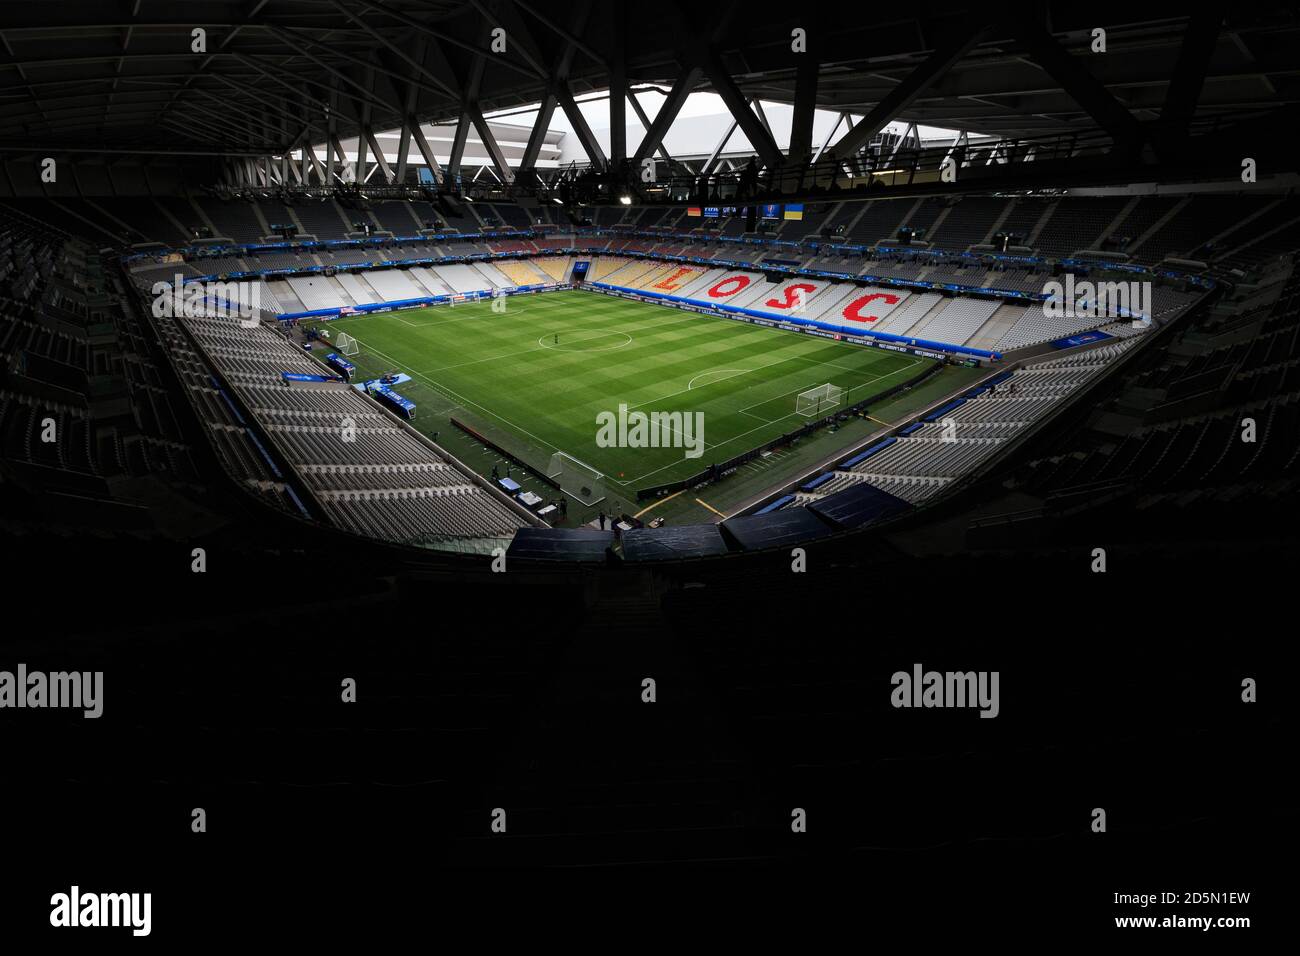 A general view of The Stade Pierre Mauroy before the Germany v Ukraine match Stock Photo